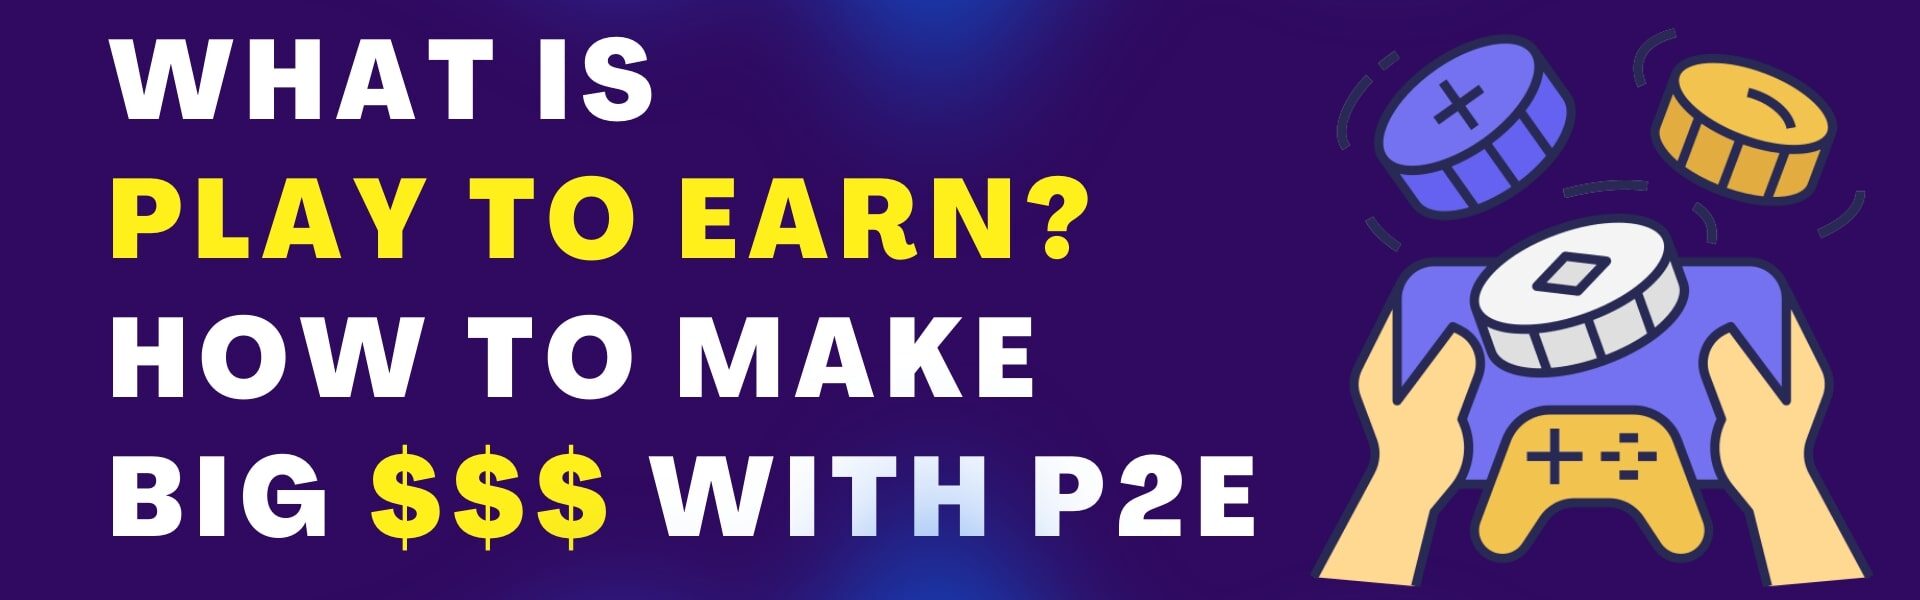 What is Play to earn and how to earn money with P2E and gaming NFT